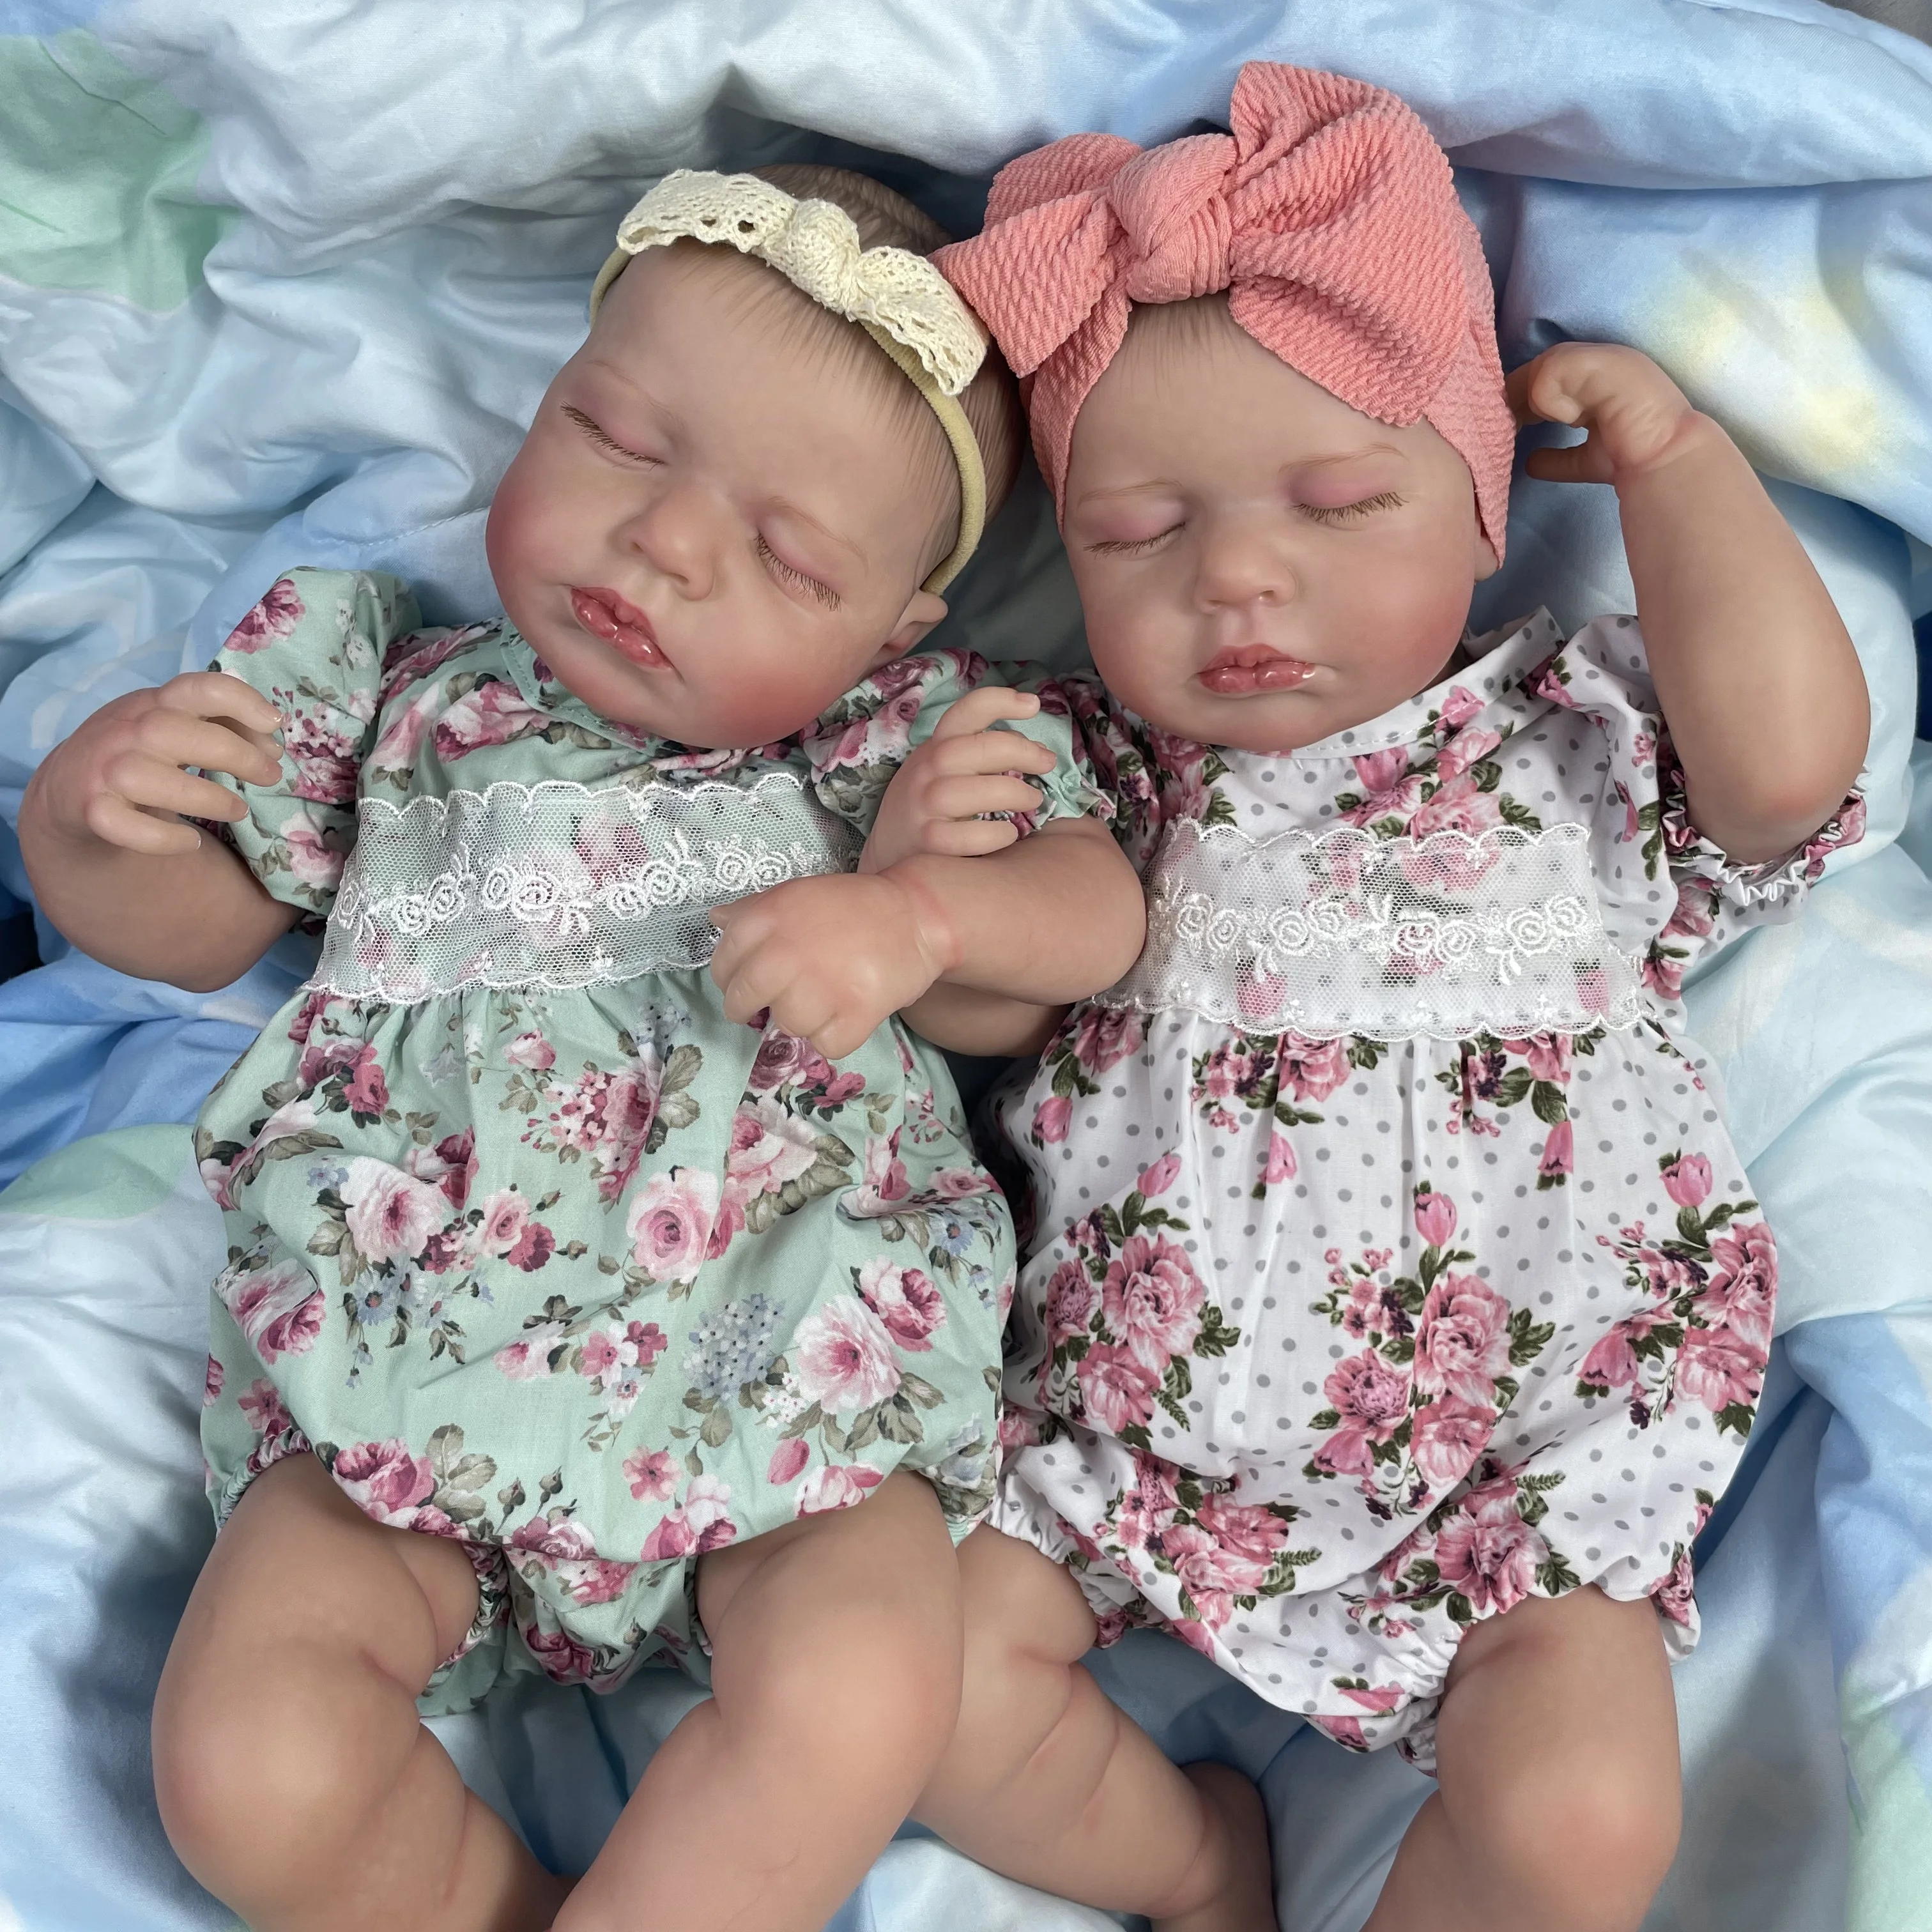 50CM Finished Reborn Baby Dolls LouLou Twins Girl Lifelike Silicone Vinyl Newborn 3D Skin Visible Veins - Reborn Doll World